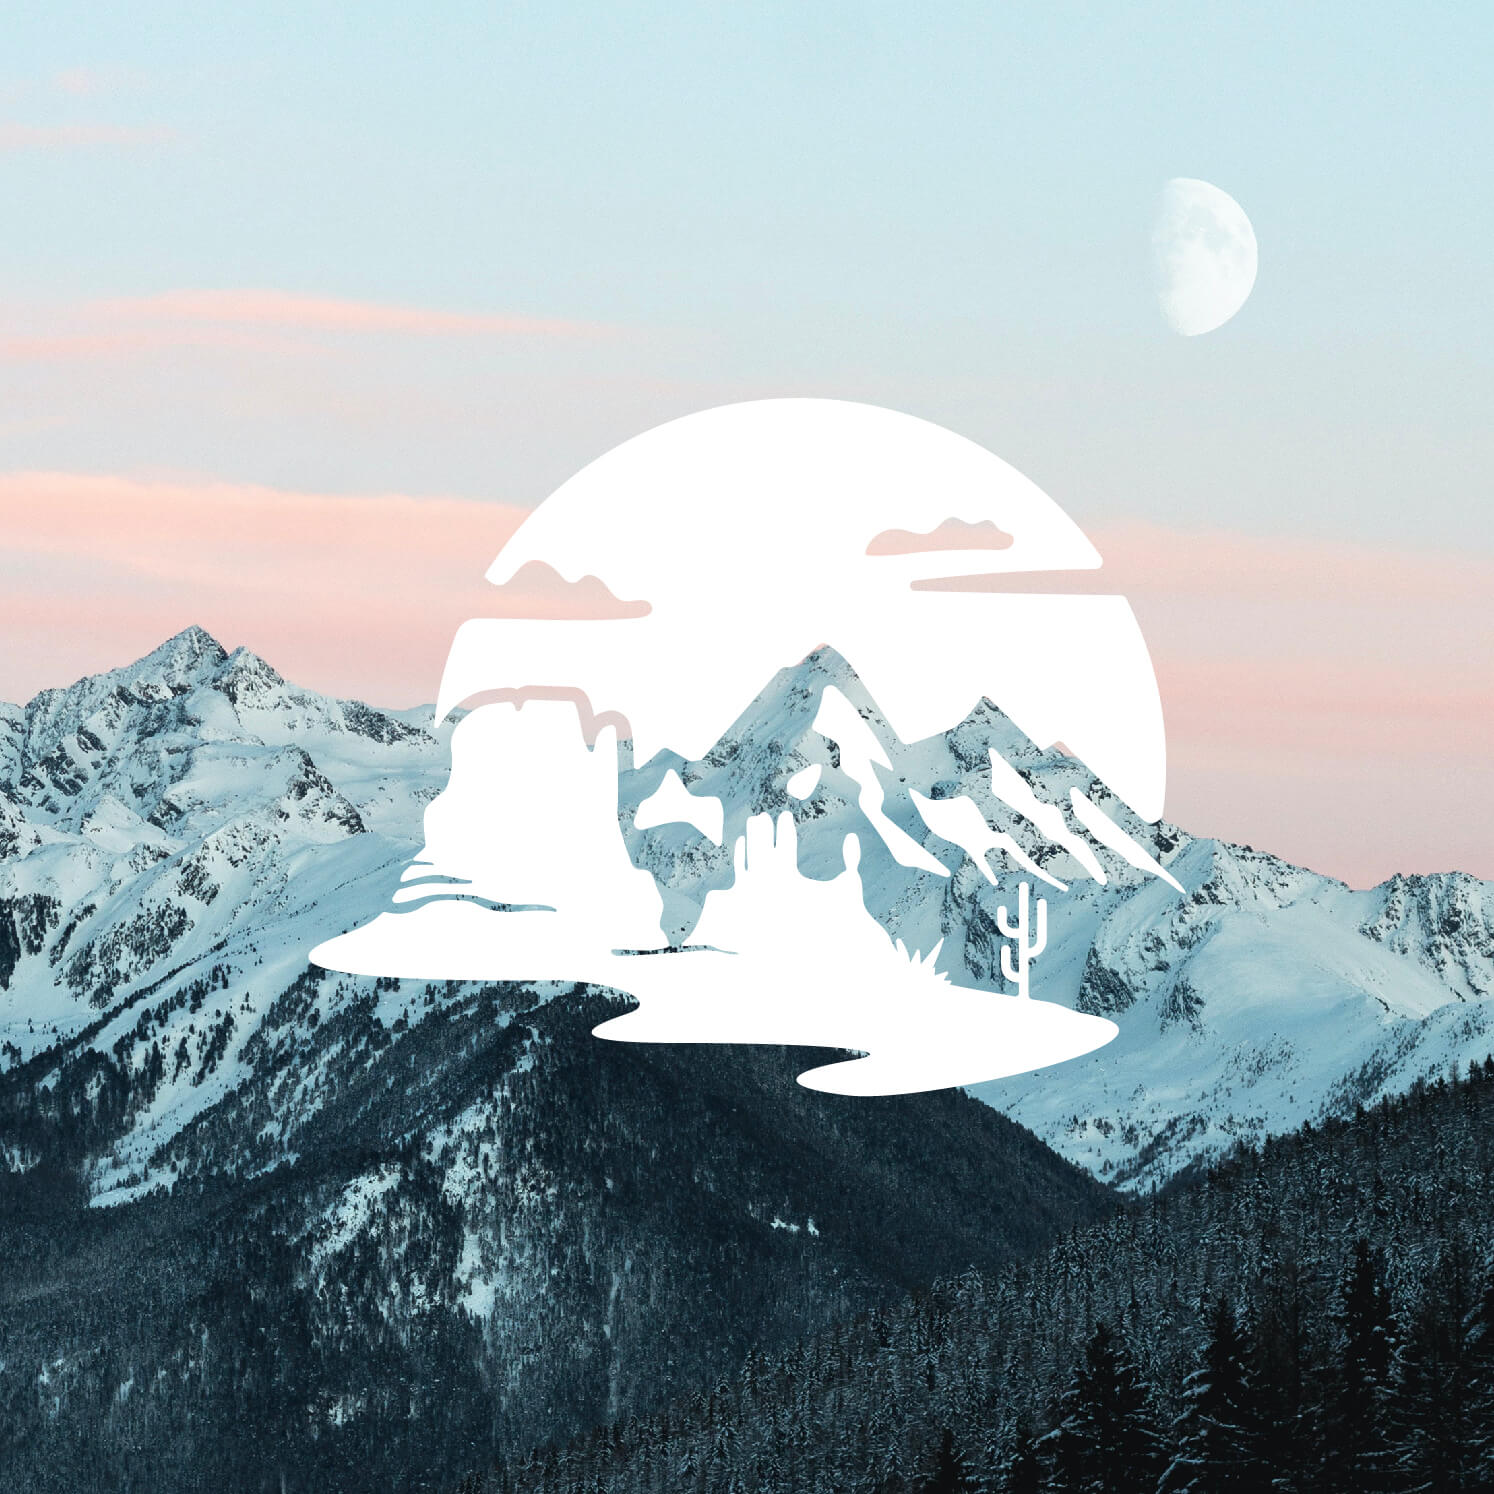 Ilana Fay Copy, copywriter for outdoors brand, graphic logo design of mountains and desert overlaid on photograph of sunrise over snow covered mountain tops